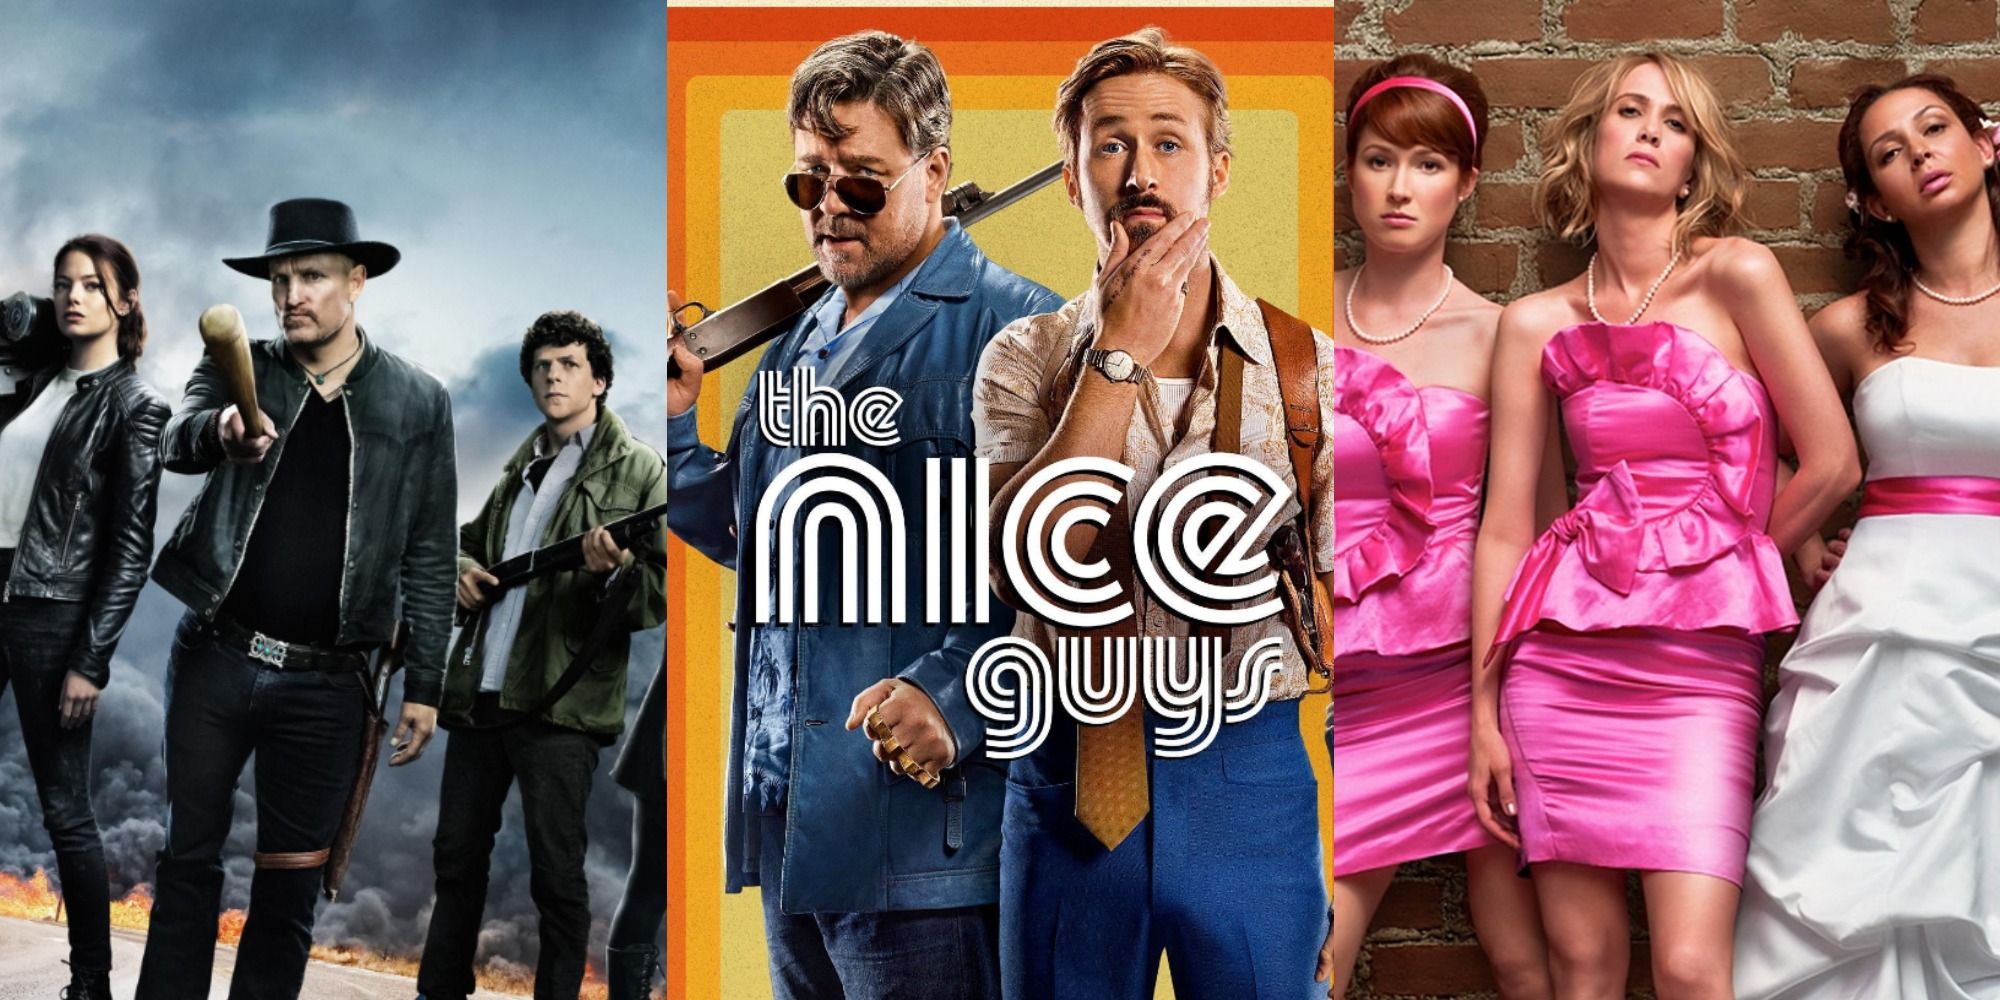 combined posters of Zombieland, The Nice Guys and Bridesmaids